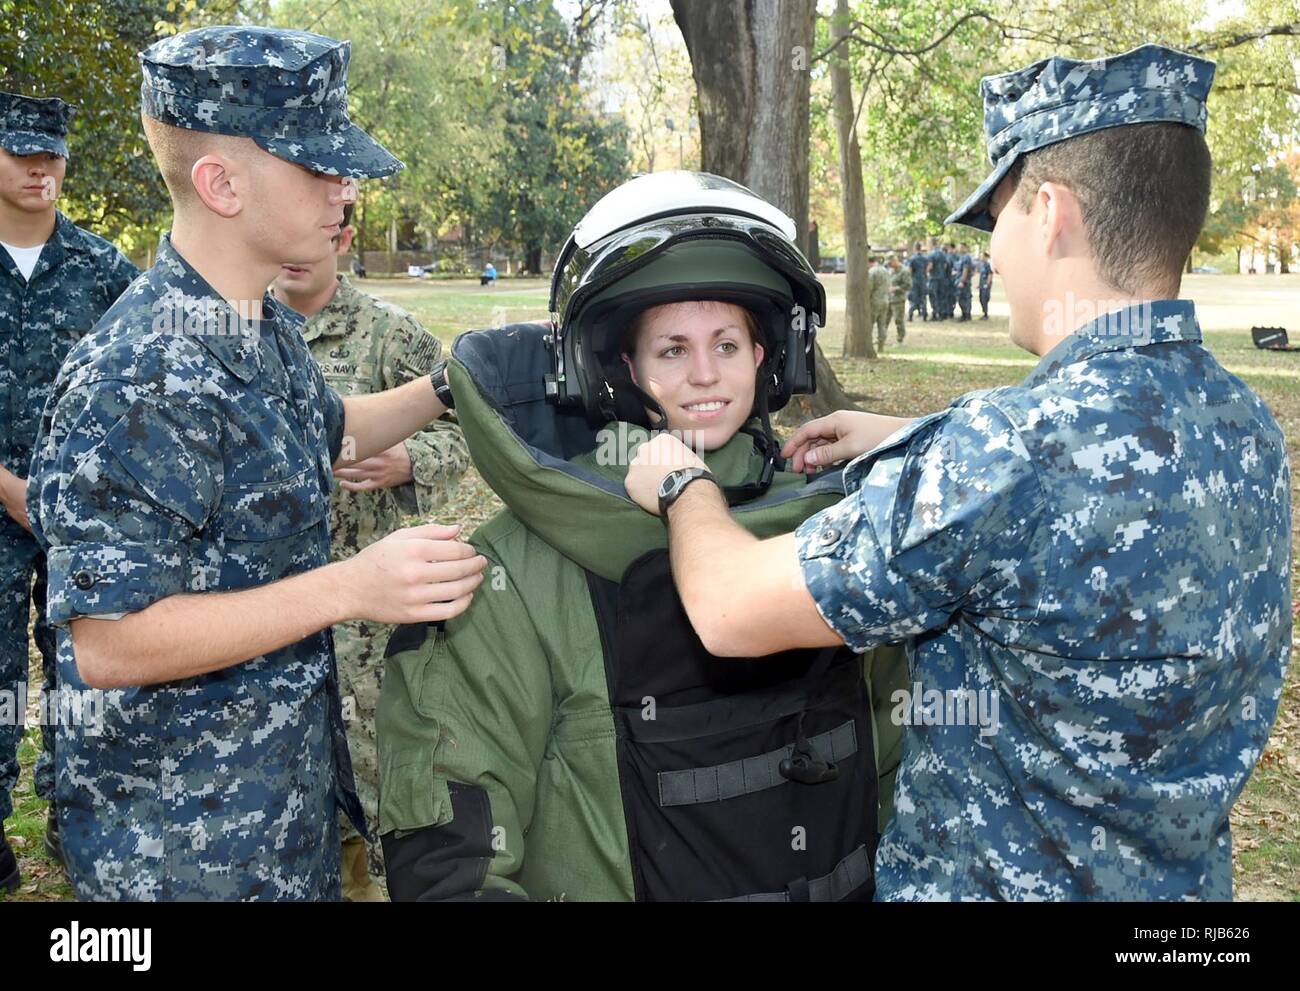 NASHVILLE, Tenn. (Nov. 4, 2016) Vanderbilt University Naval Reserve Officers Training Corps (NROTC) Midshipman 2nd Class, Maddie Hoffman is “suited up” in an EOD9 Bomb Suit by Midshipman 4th Class Alex McLaren, right, and Midshipman 3rd Class Nicholas Piccioli on the Vanderbilt campus. Vanderbilt NROTC hosted an Explosive Ordnance Disposal (EOD) “Exceptional Exposure” weekend for more than 40 NROTC midshipmen from units around the country. Stock Photo